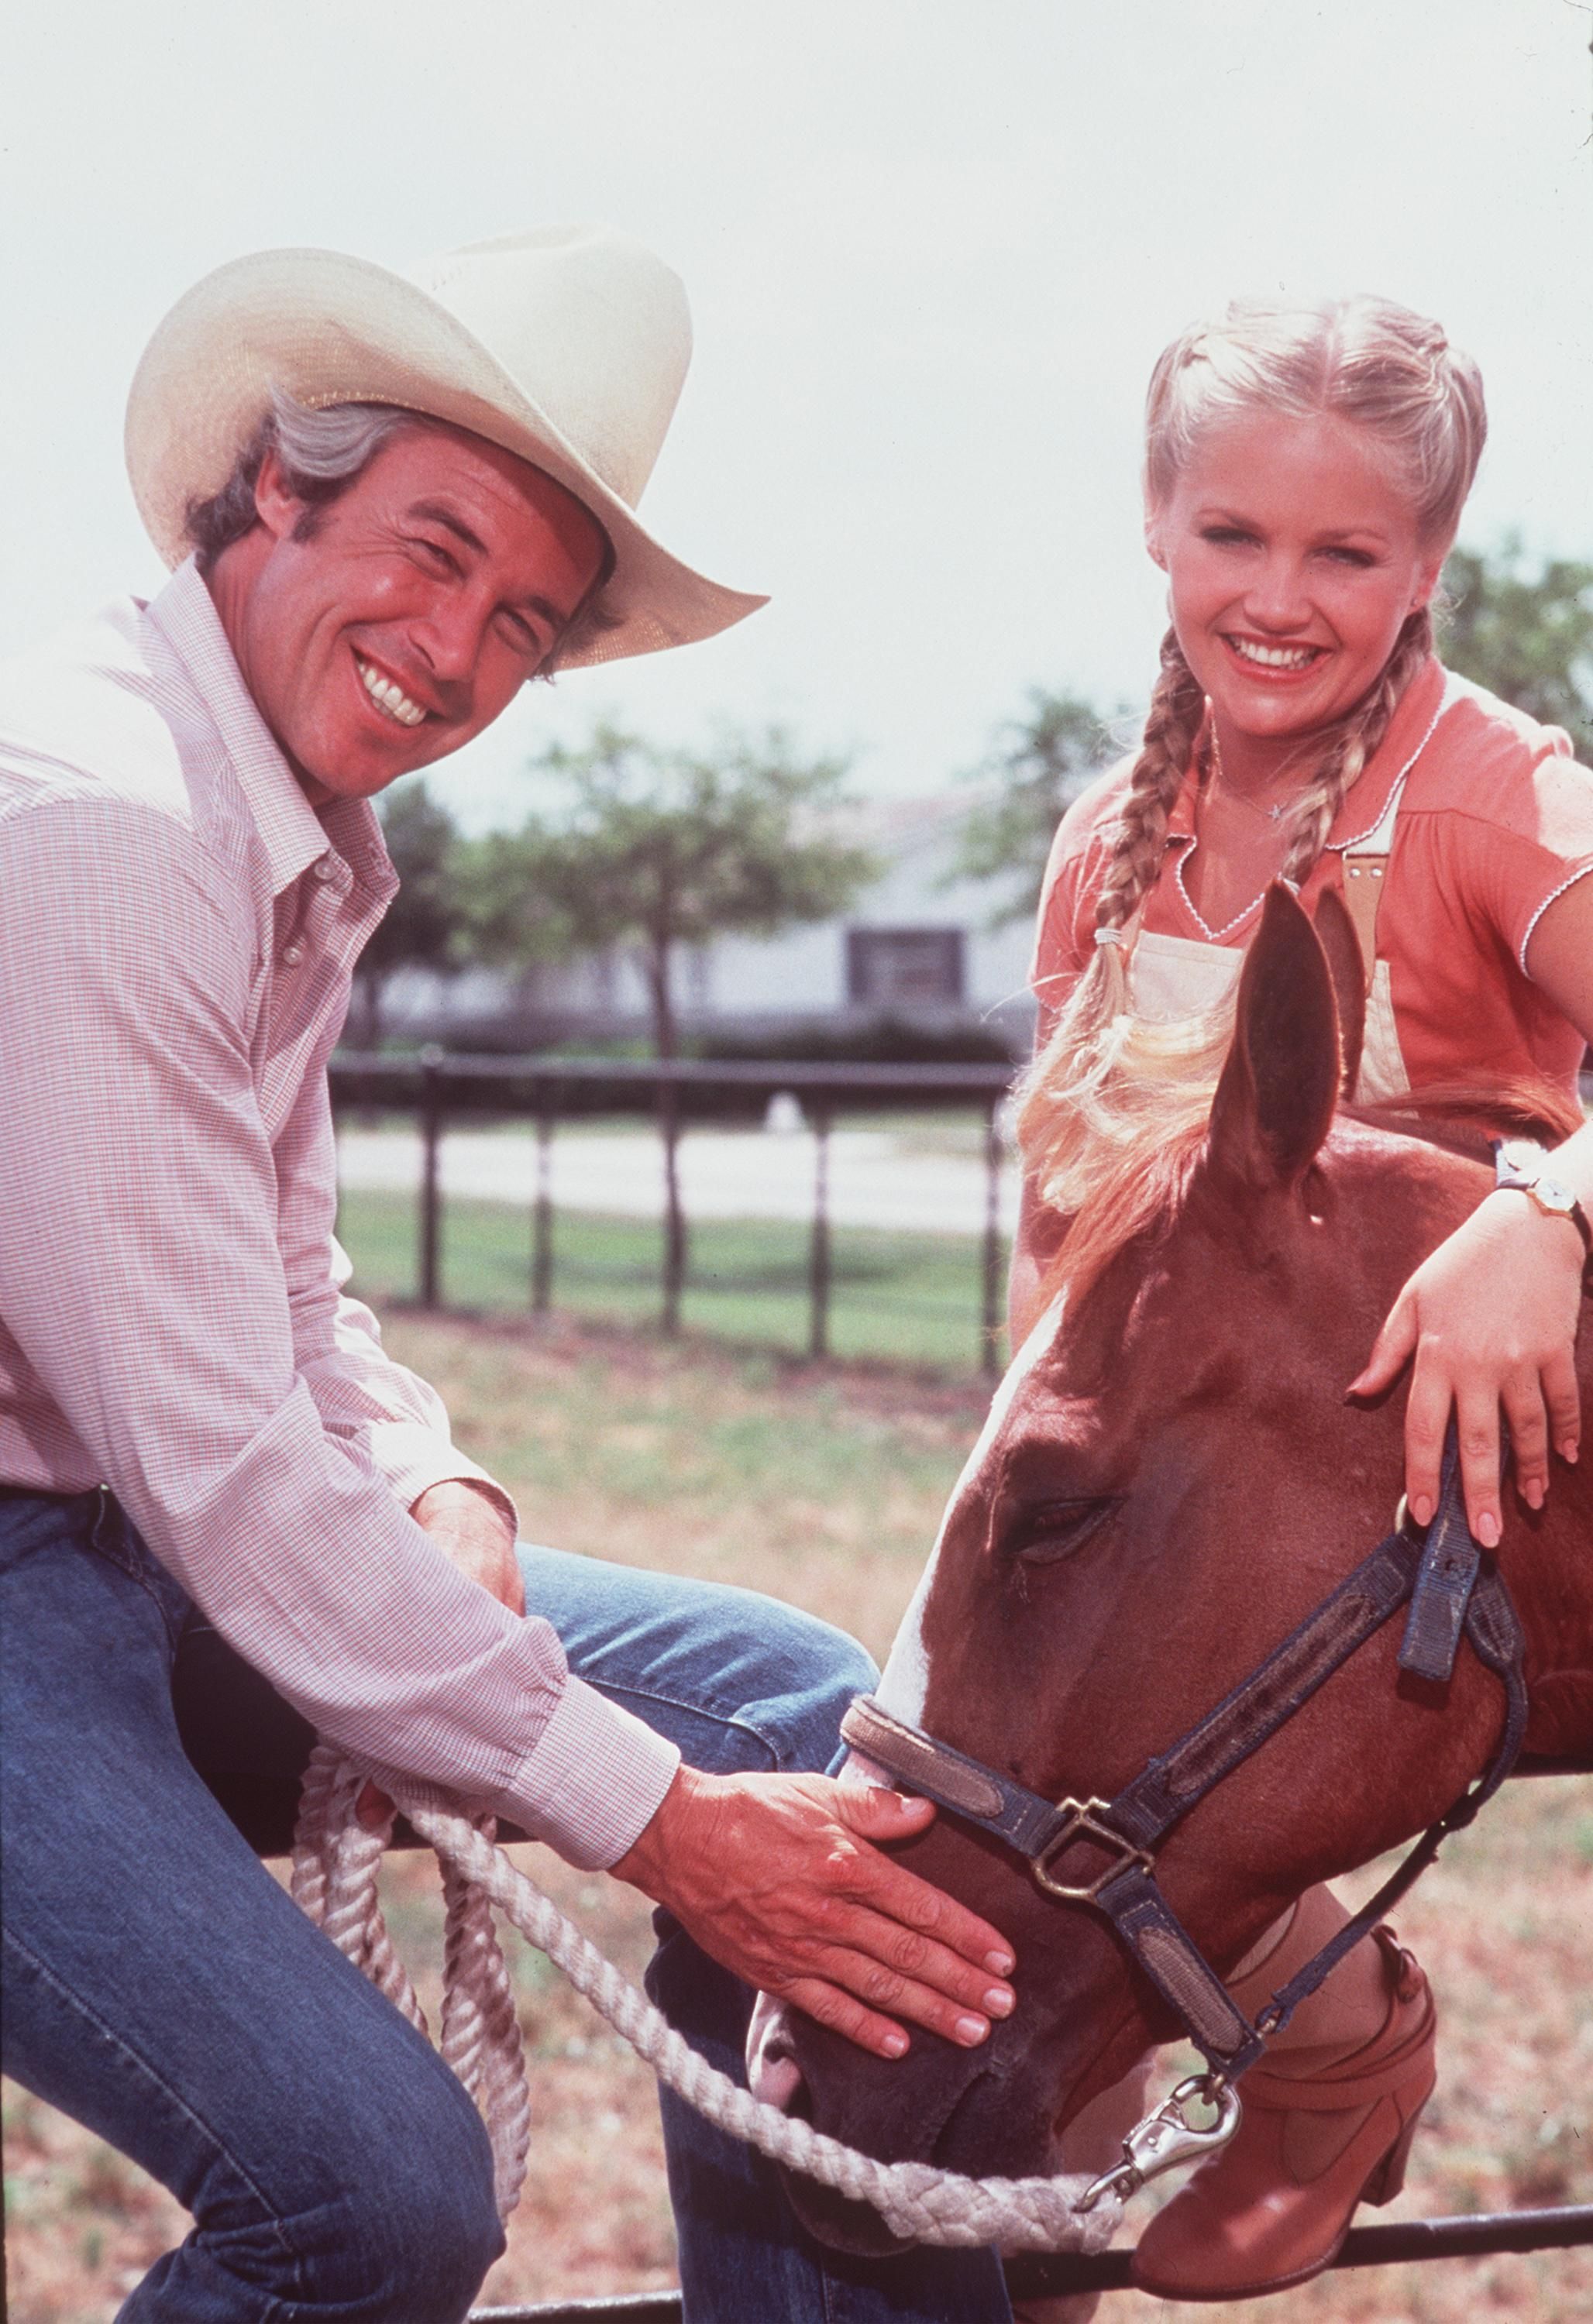 Charlene Tilton as Lucy Ewing in "Dallas" publicity stills with her co-star at an unspecified location and date. | Source: Newsmakers/Getty Images